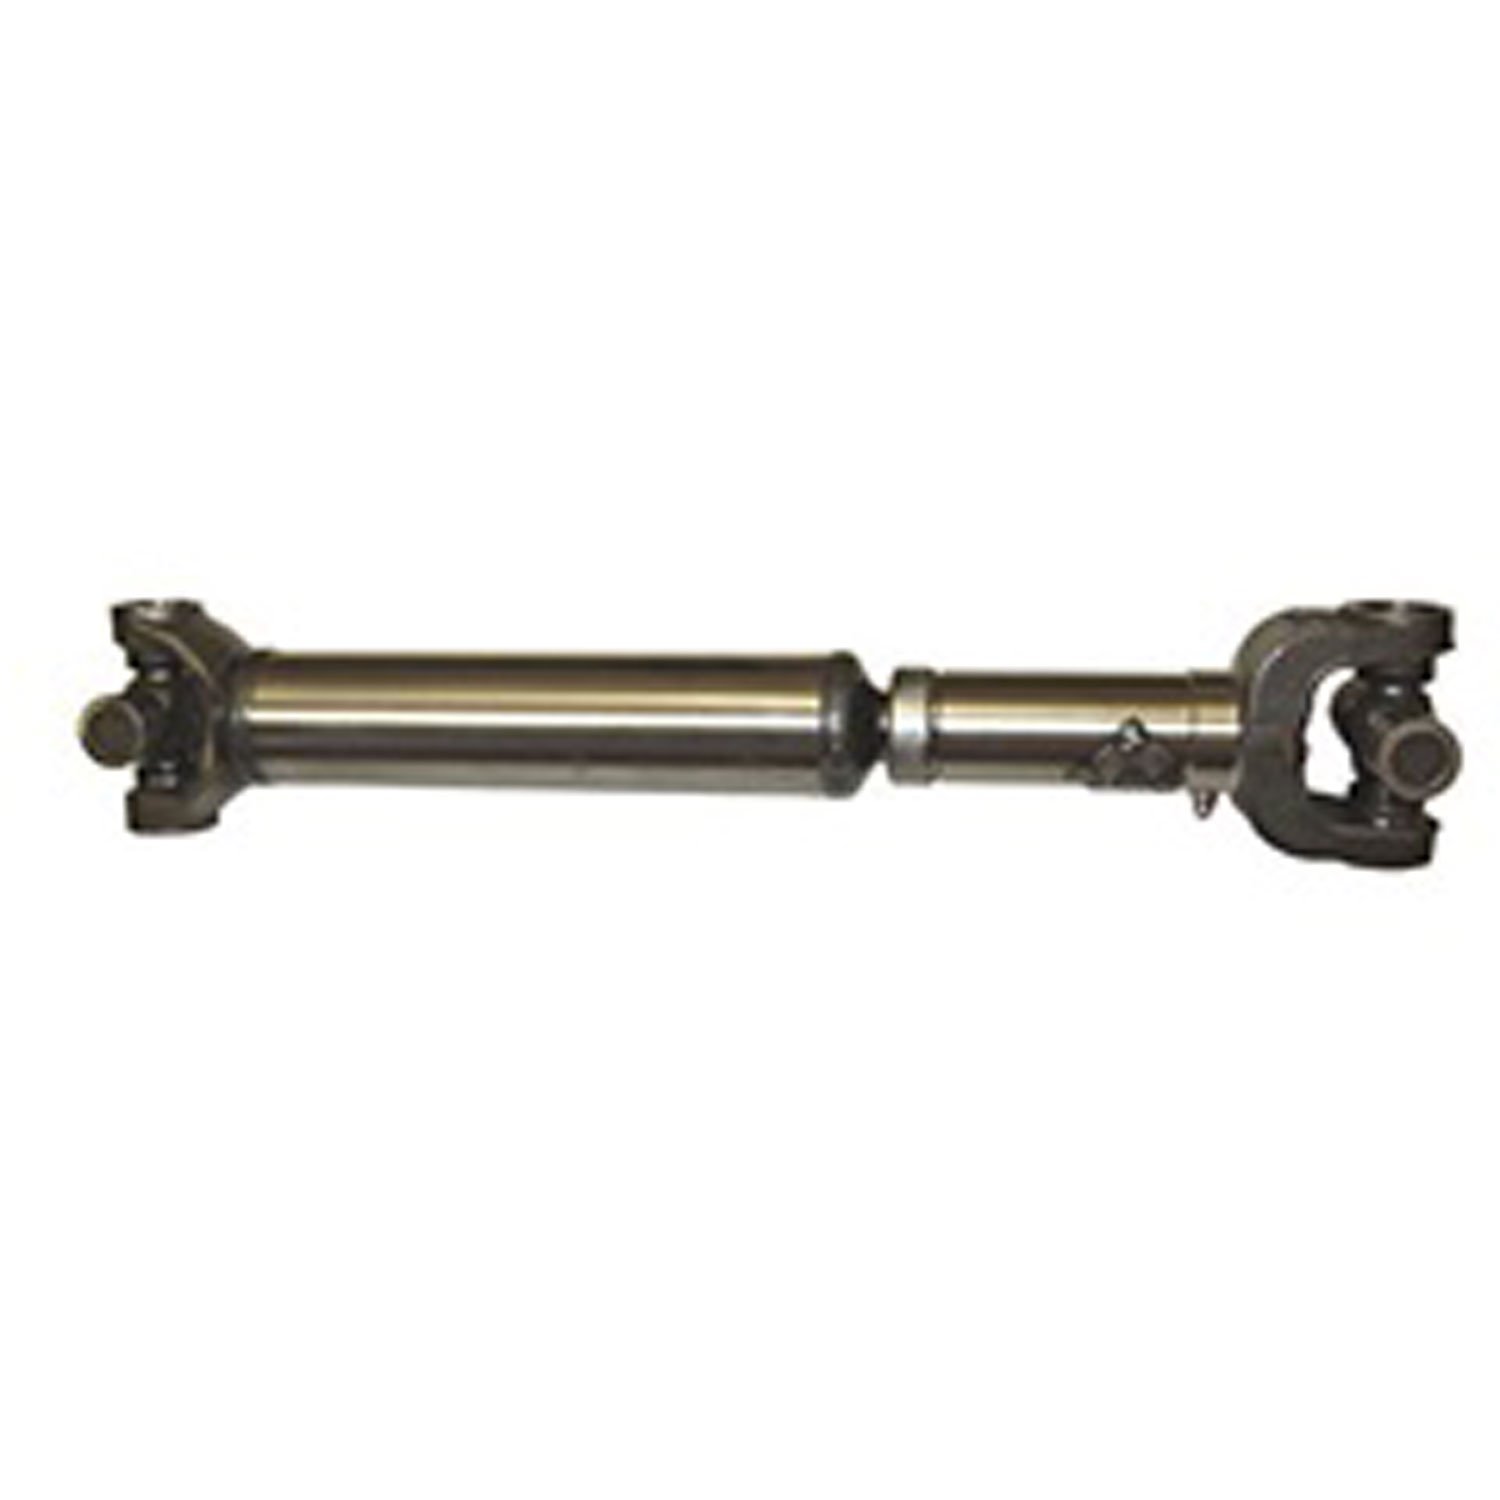 Replacement front driveshaft from Omix-ADA, Fits 82-83 Jeep CJ5 and 82-86 Jeep CJ7 with manual transmissions.